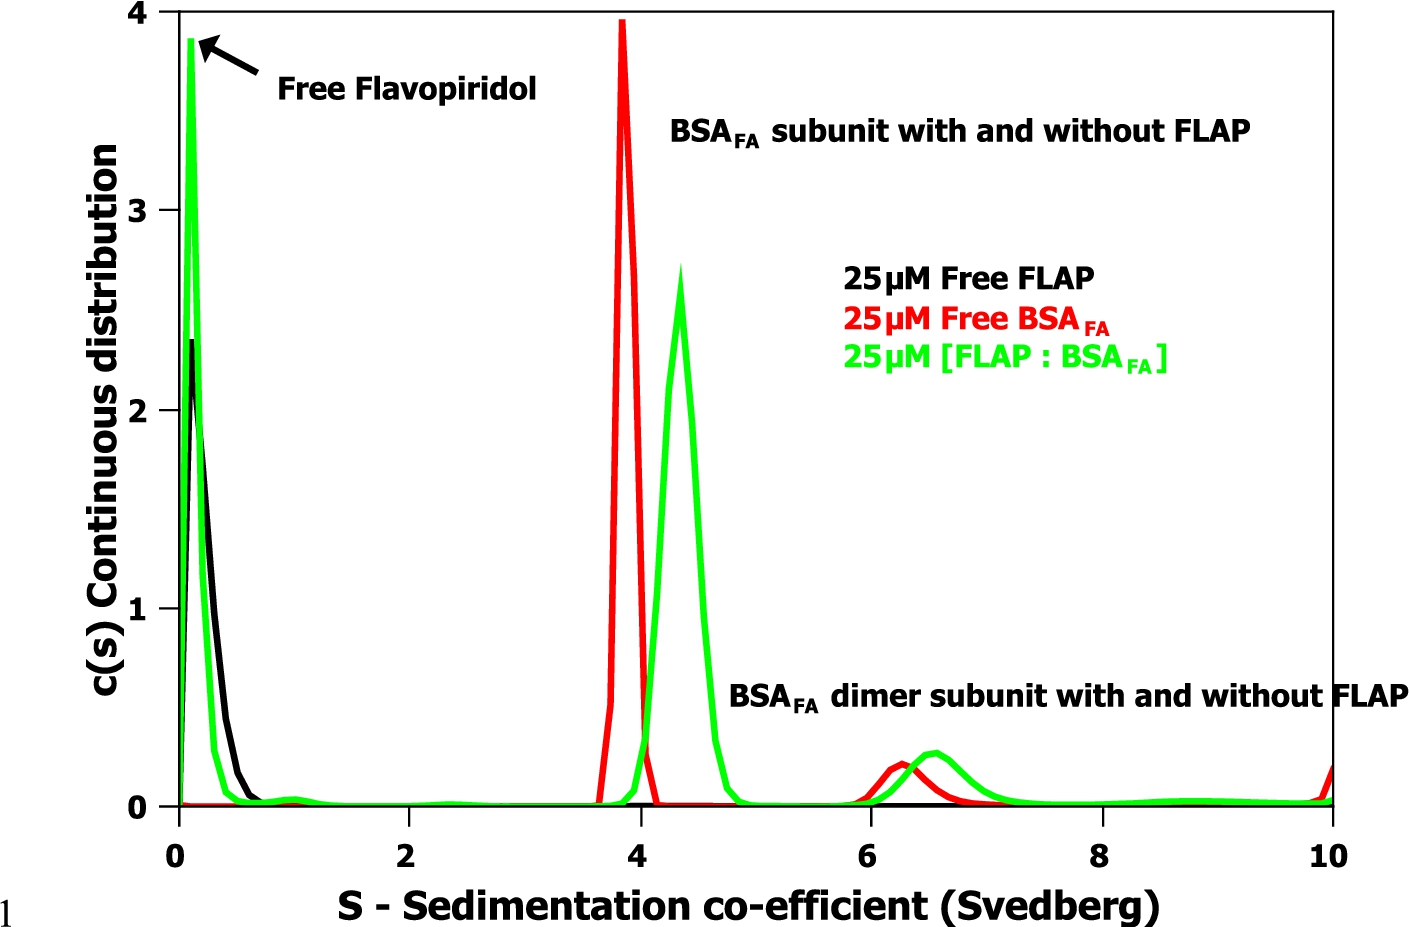 Equilibria Analytical ultracentrifuge data of 25μM FLAP (black), 25μM BSAFA (red) and a mixture of 25μM FLAP: 25μM BSAFA (green) in ddH2O. The sedimentation coefficient distribution was obtained by SEDFIT Analysis [9] of the absorbance data at 280 nm of a sedimentation velocity experiment at 129,024 g (RCF) and 20°C.